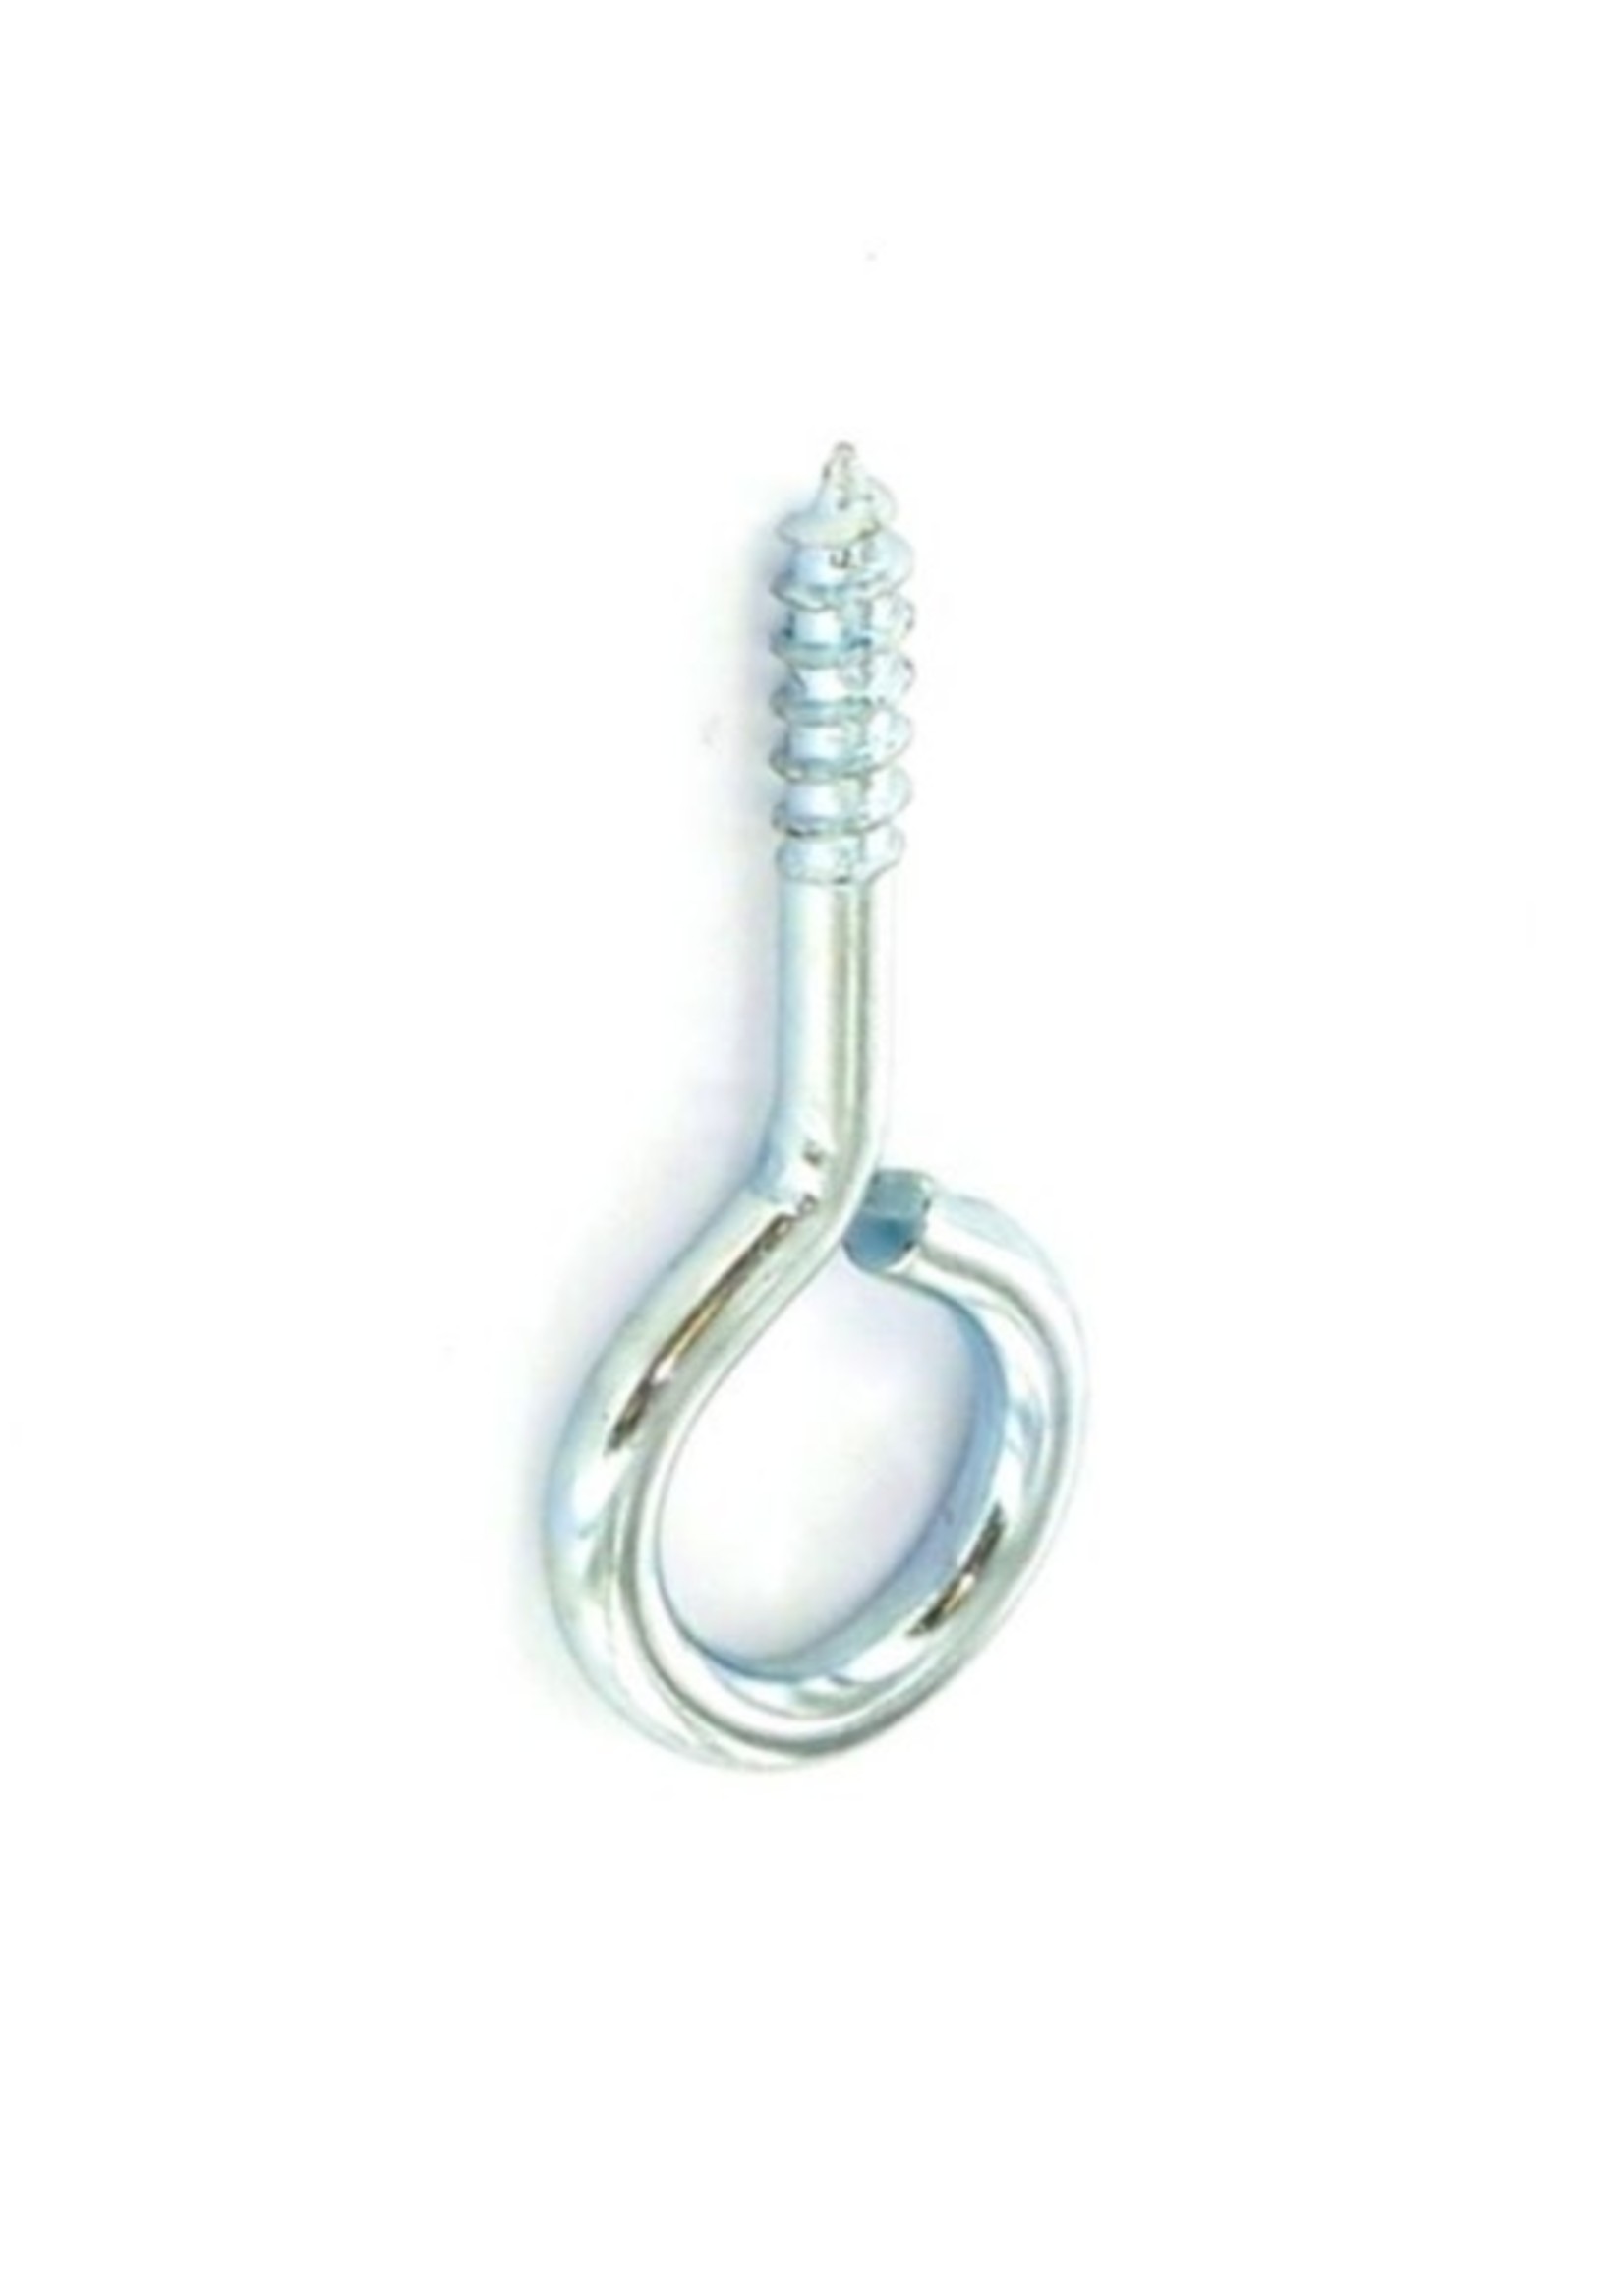 Securit Securit Screw Eye Zinc Plated 55mm (3 Pack) S6256